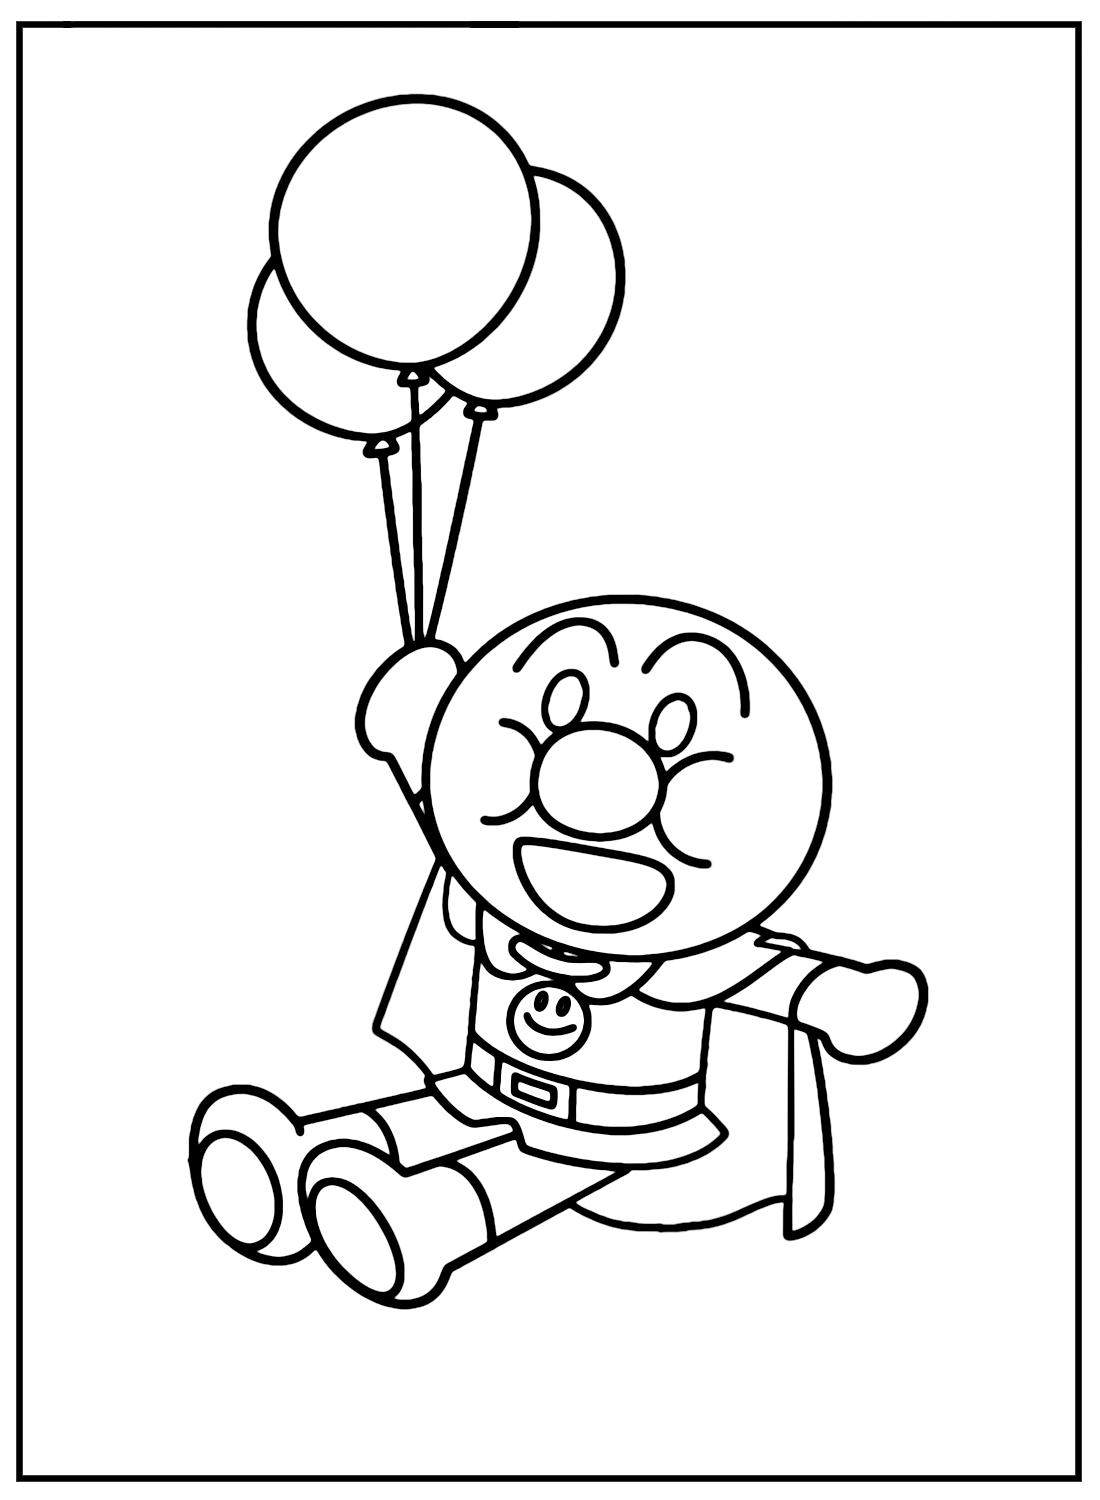 Balloons With Anpanman Coloring Pages